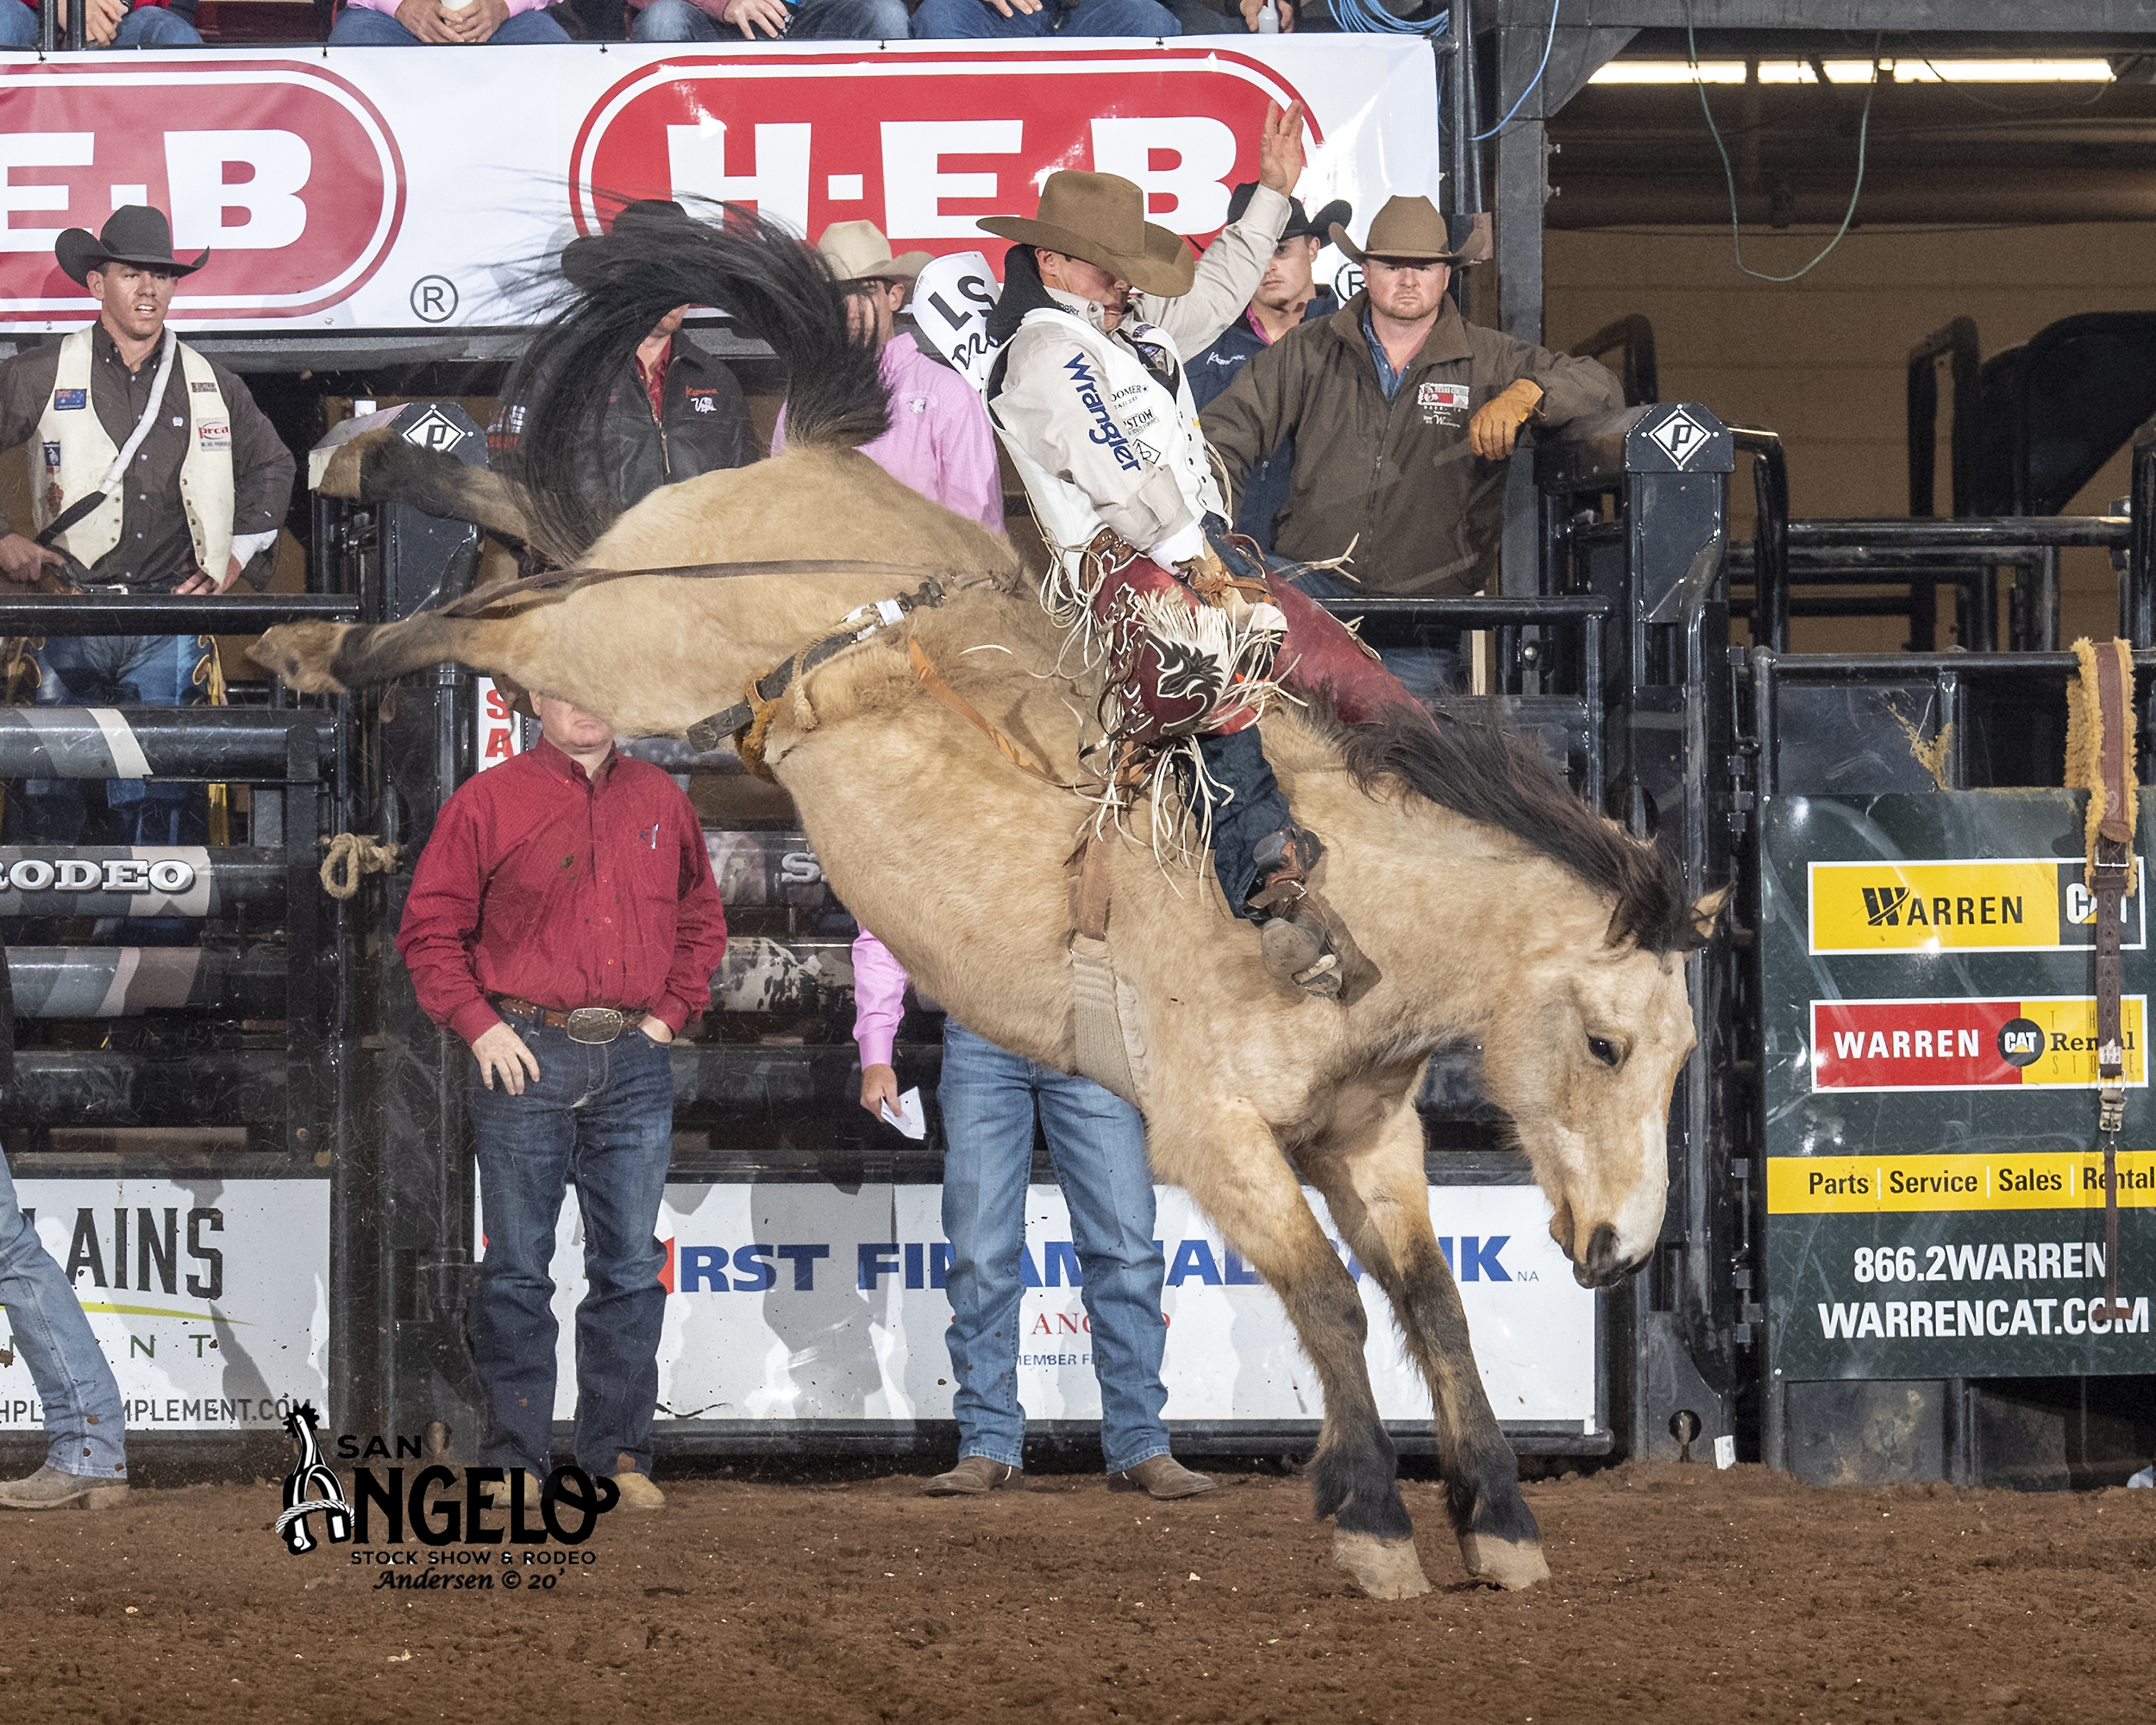 Reigning world champion bareback rider Clayton Biglow rides Northcott Macza's Time Machine for 84 points to catch a little first round money while qualifying for Friday's short round at the San Angelo Stock Show and Rodeo. (PHOTO BY RIC ANDERSEN